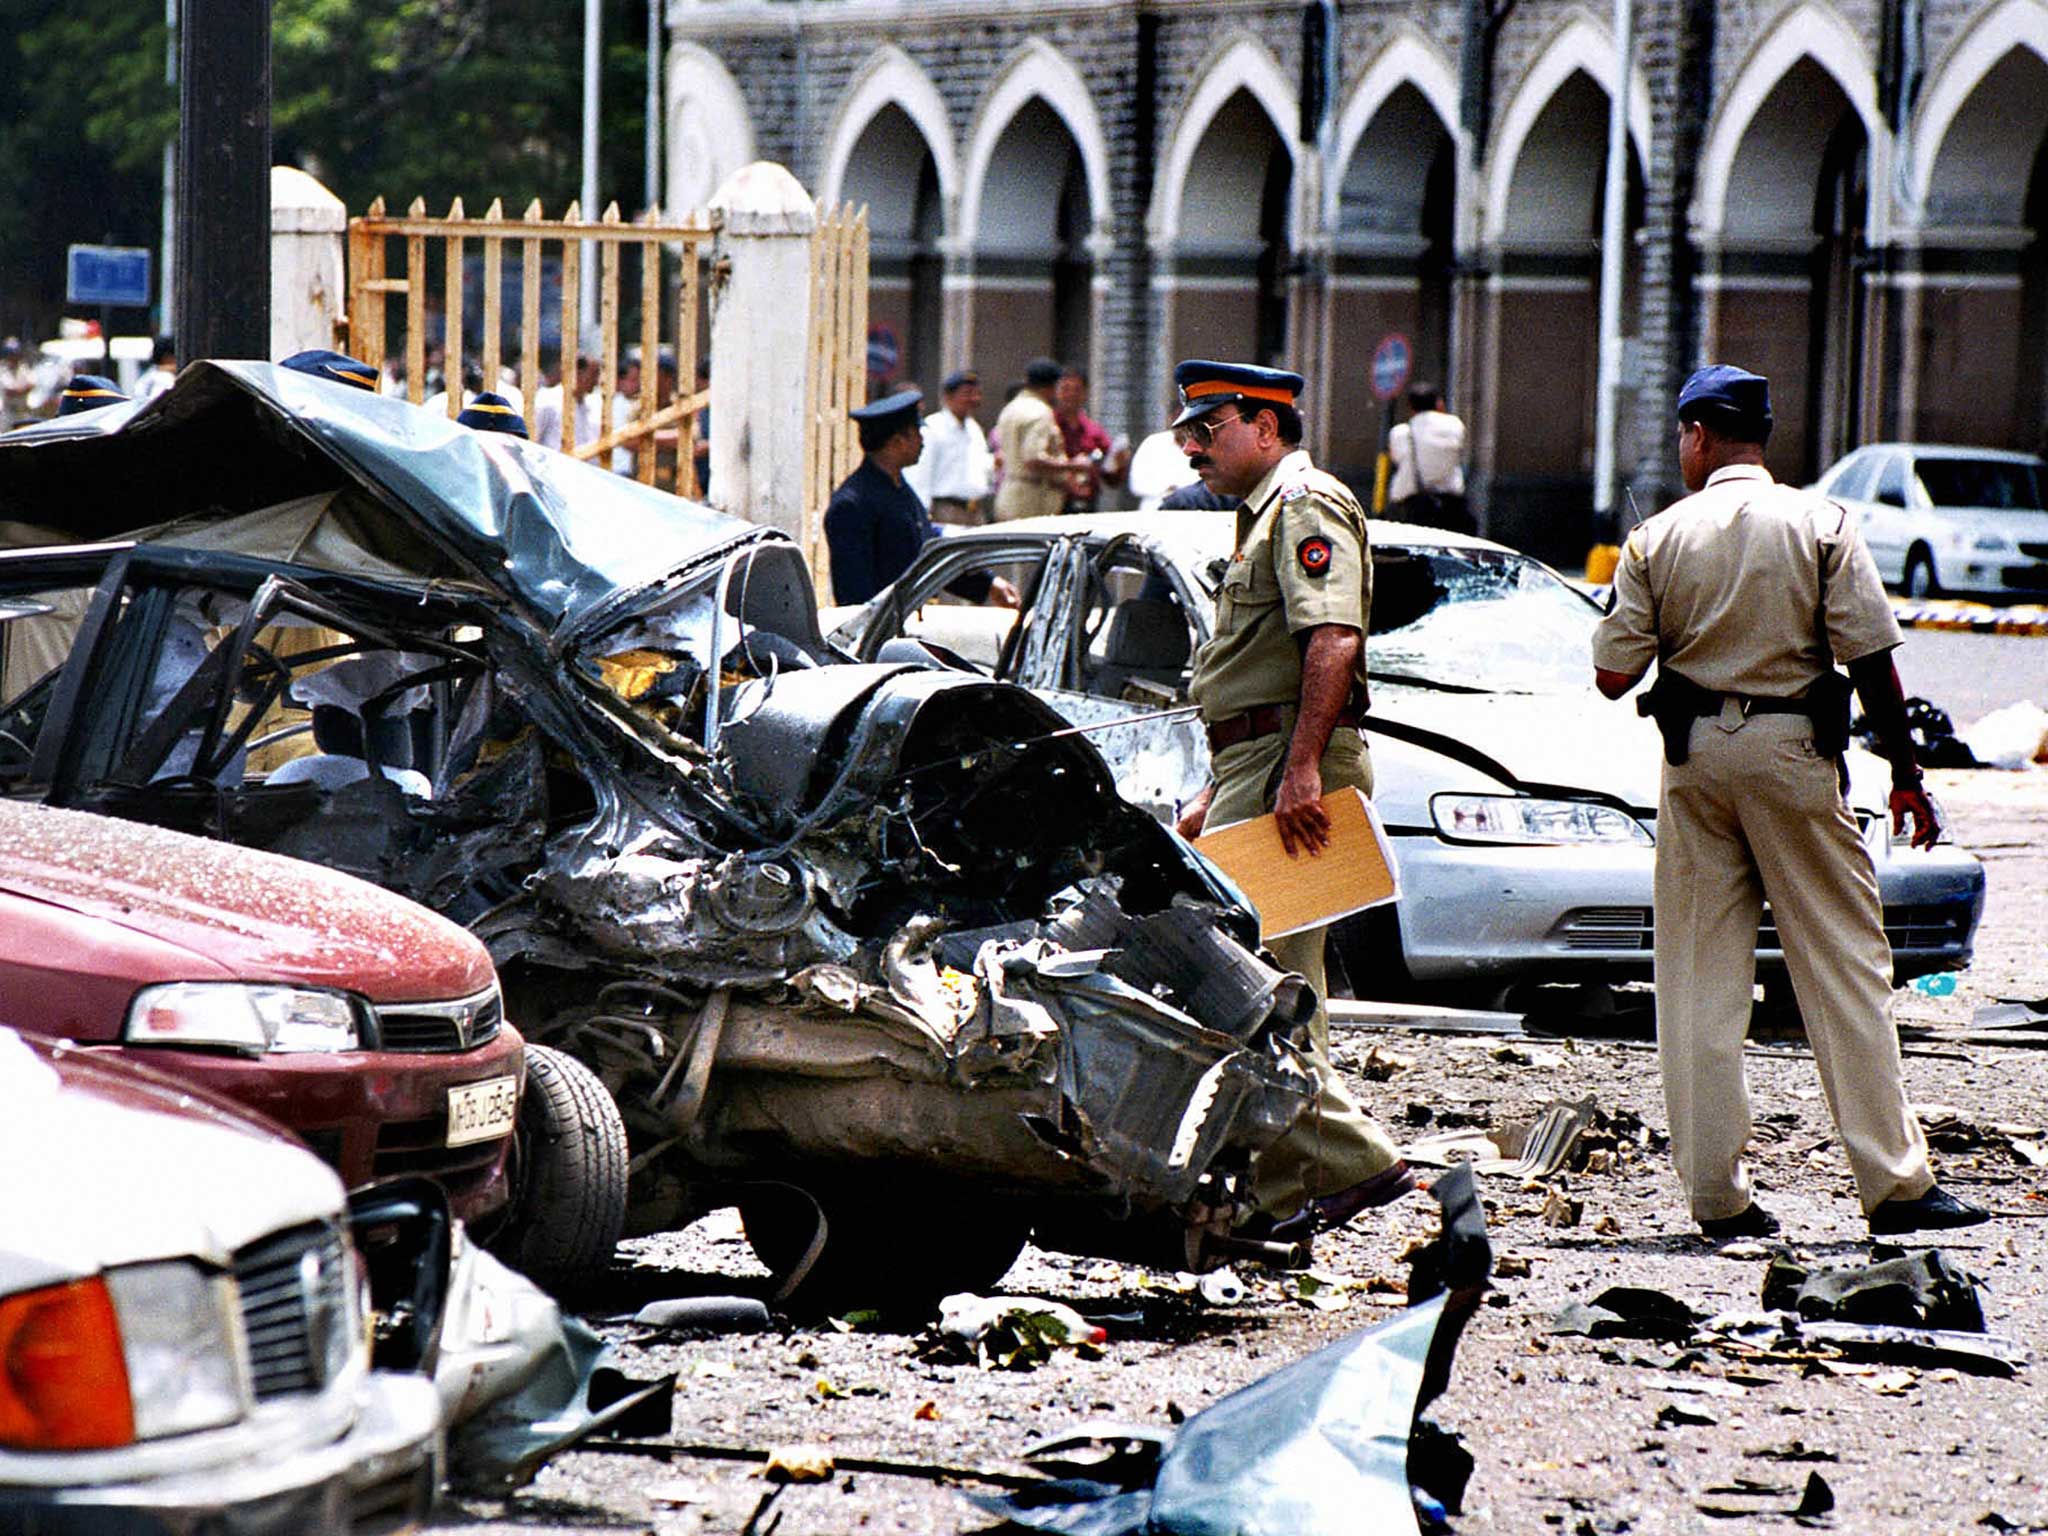 Police officers survey some of the damage in the aftermath of the 2008 Mumbai bombings